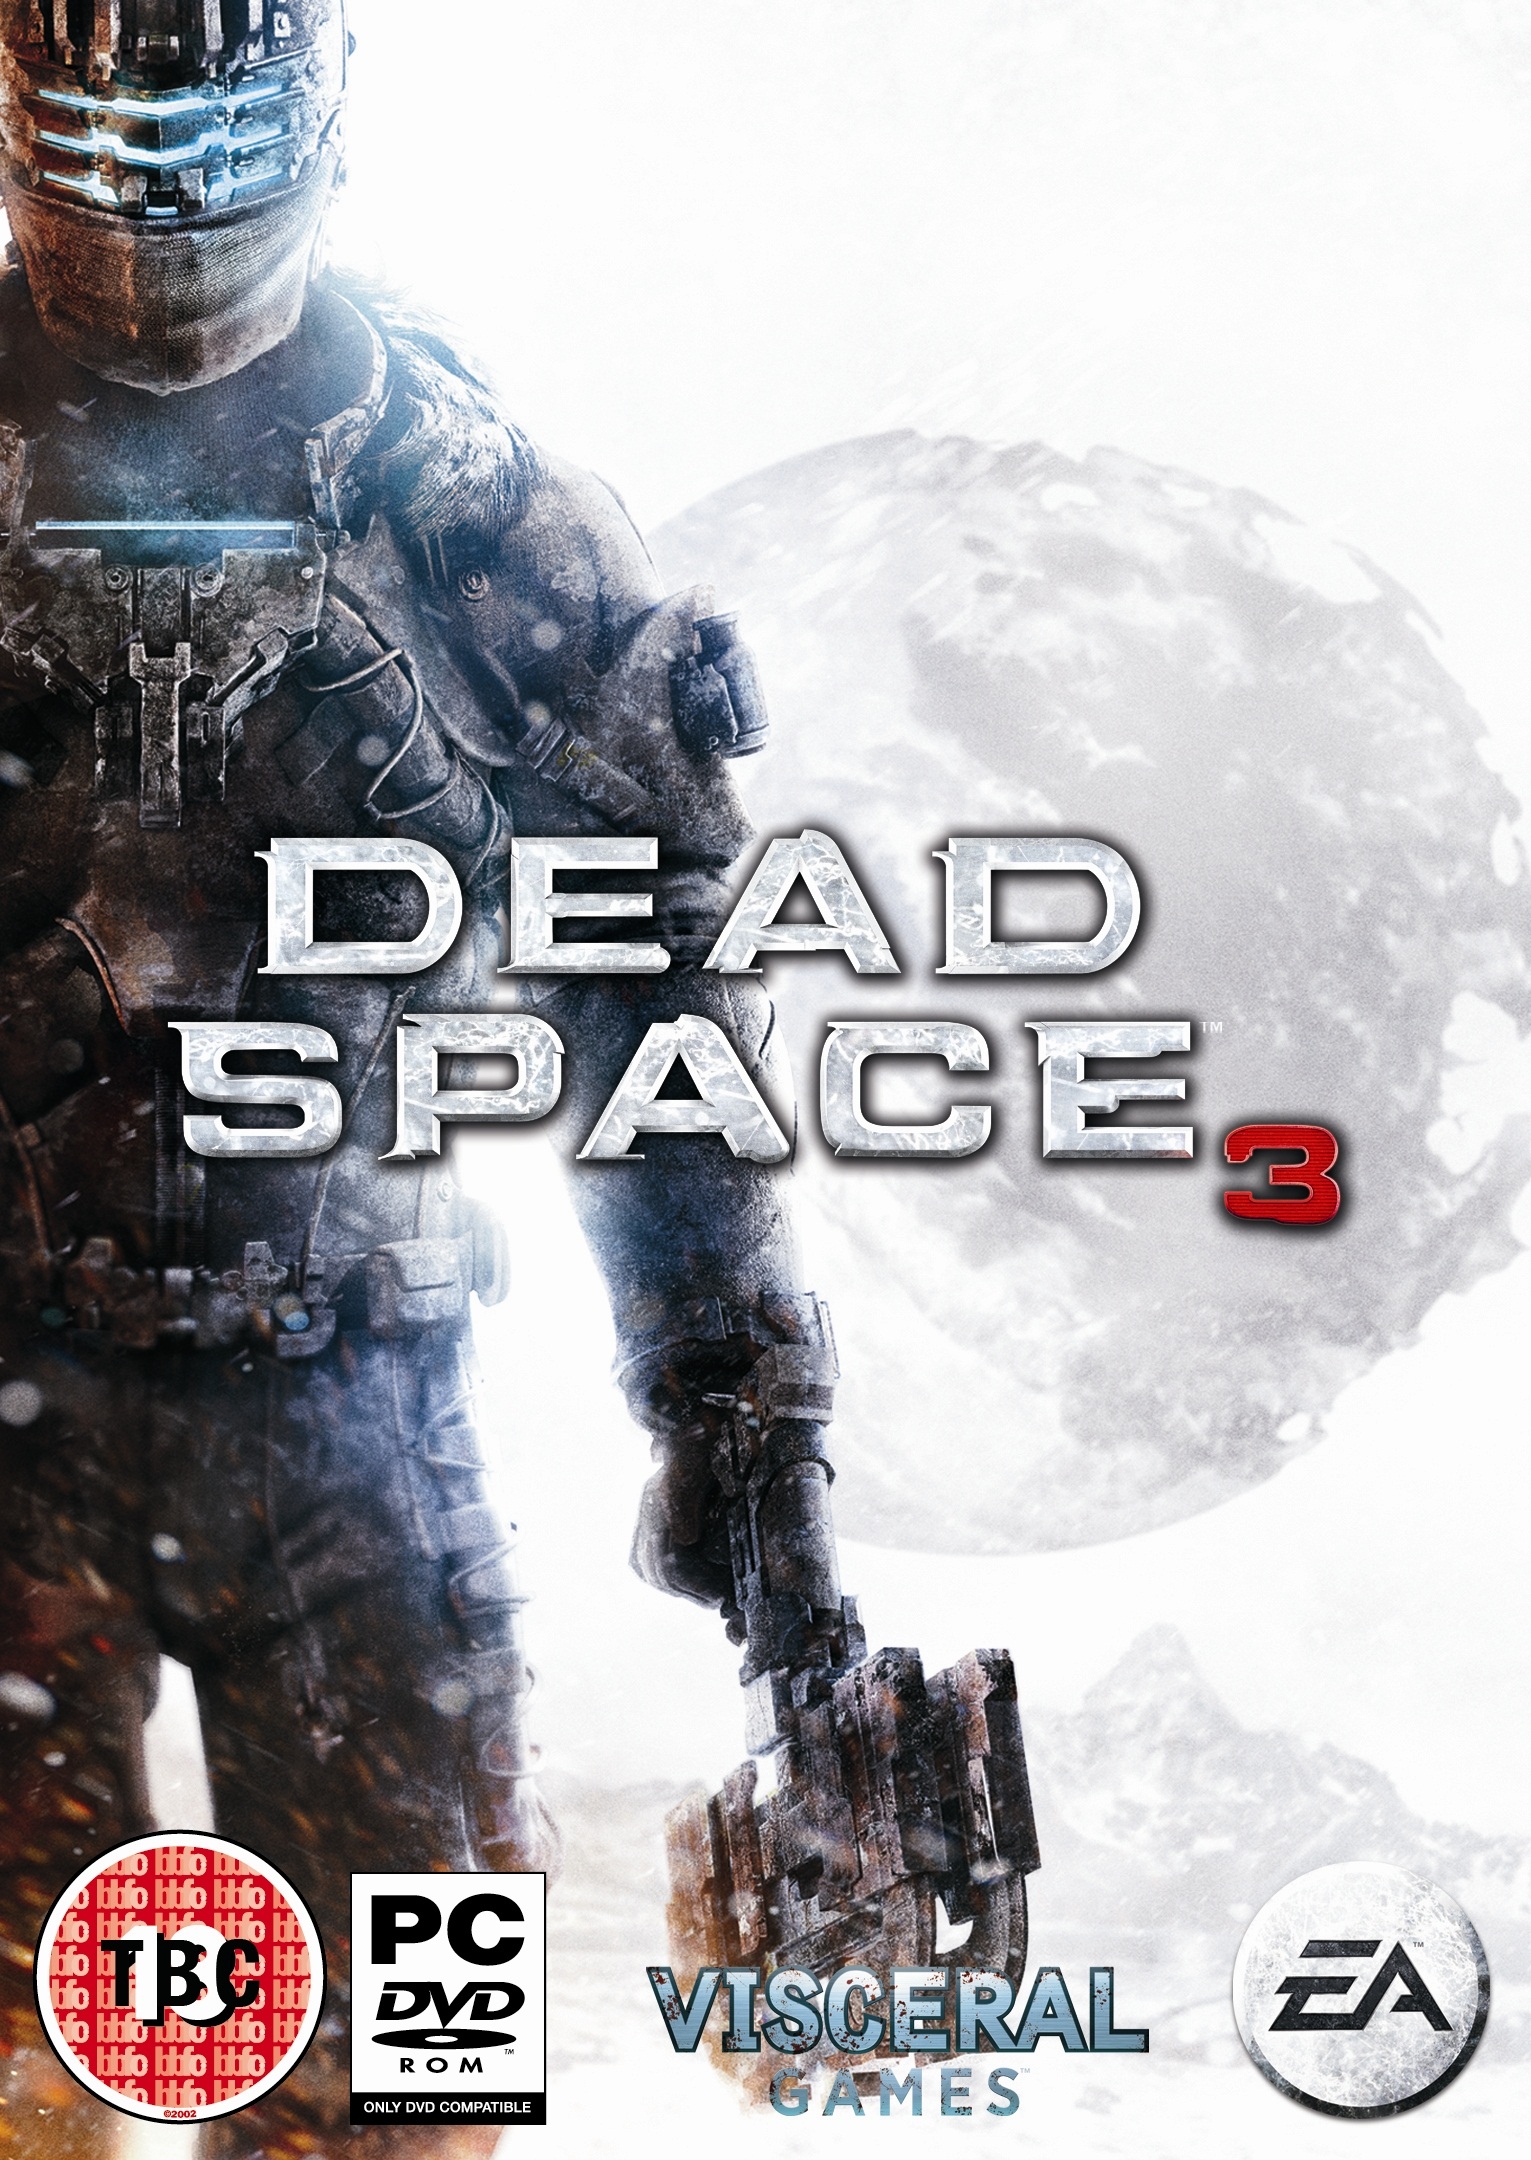 origin ingame does not work on dead space 3